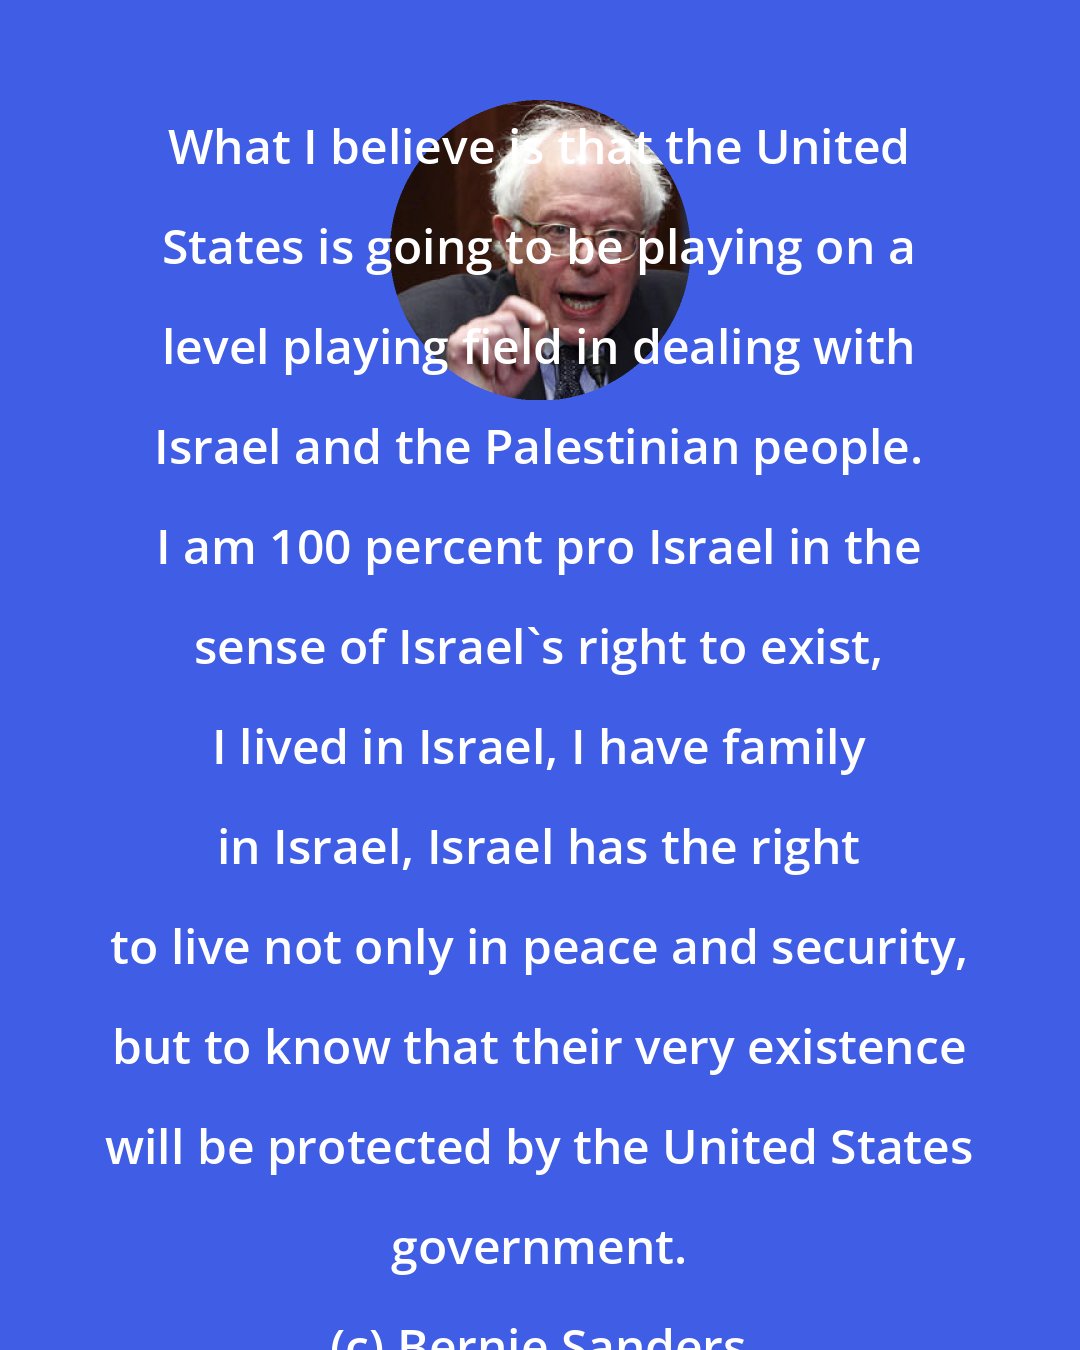 Bernie Sanders: What I believe is that the United States is going to be playing on a level playing field in dealing with Israel and the Palestinian people. I am 100 percent pro Israel in the sense of Israel's right to exist, I lived in Israel, I have family in Israel, Israel has the right to live not only in peace and security, but to know that their very existence will be protected by the United States government.